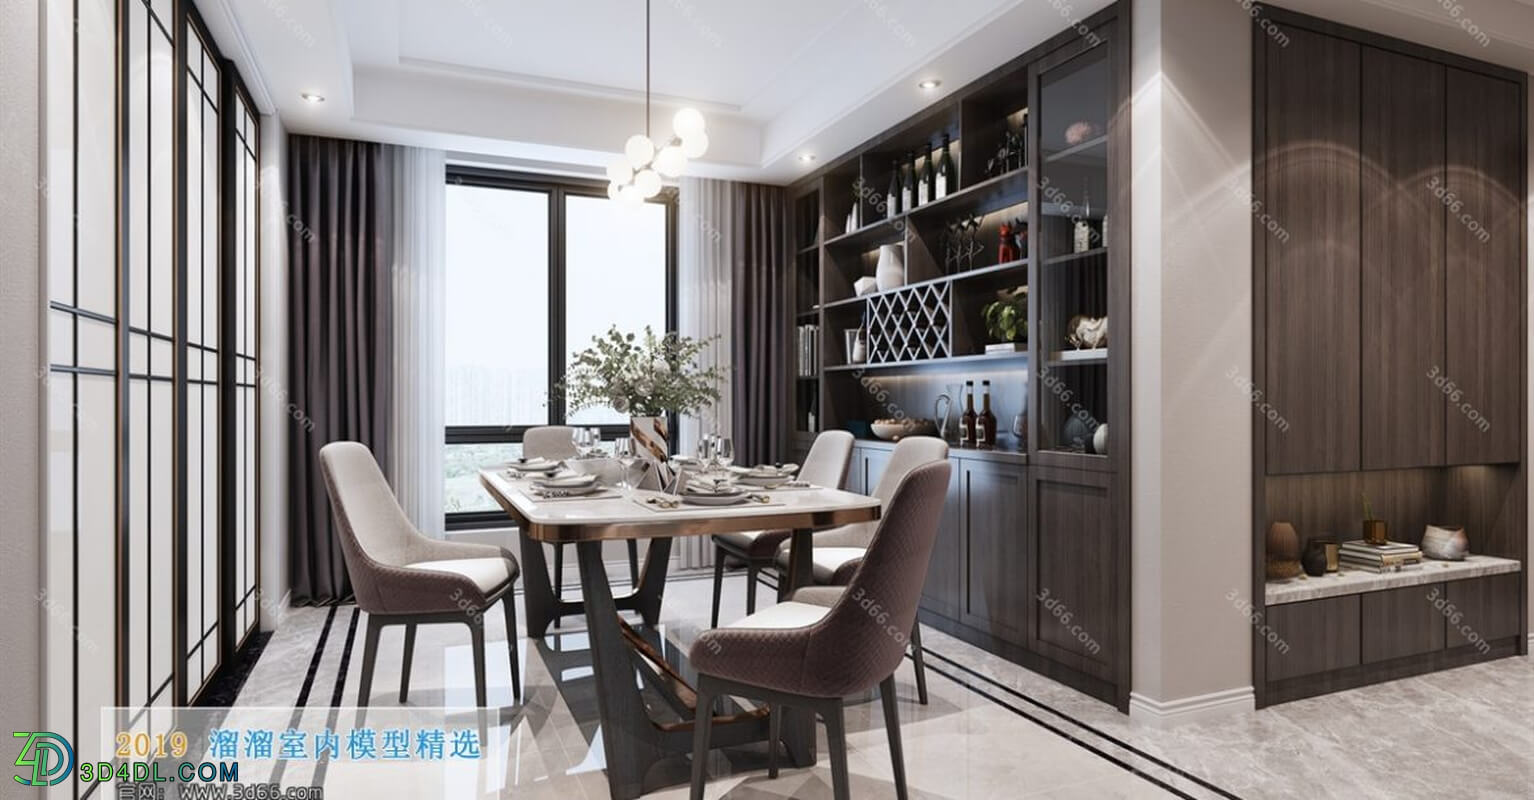 3D66 2019 Dining Room & Kitchen (006)